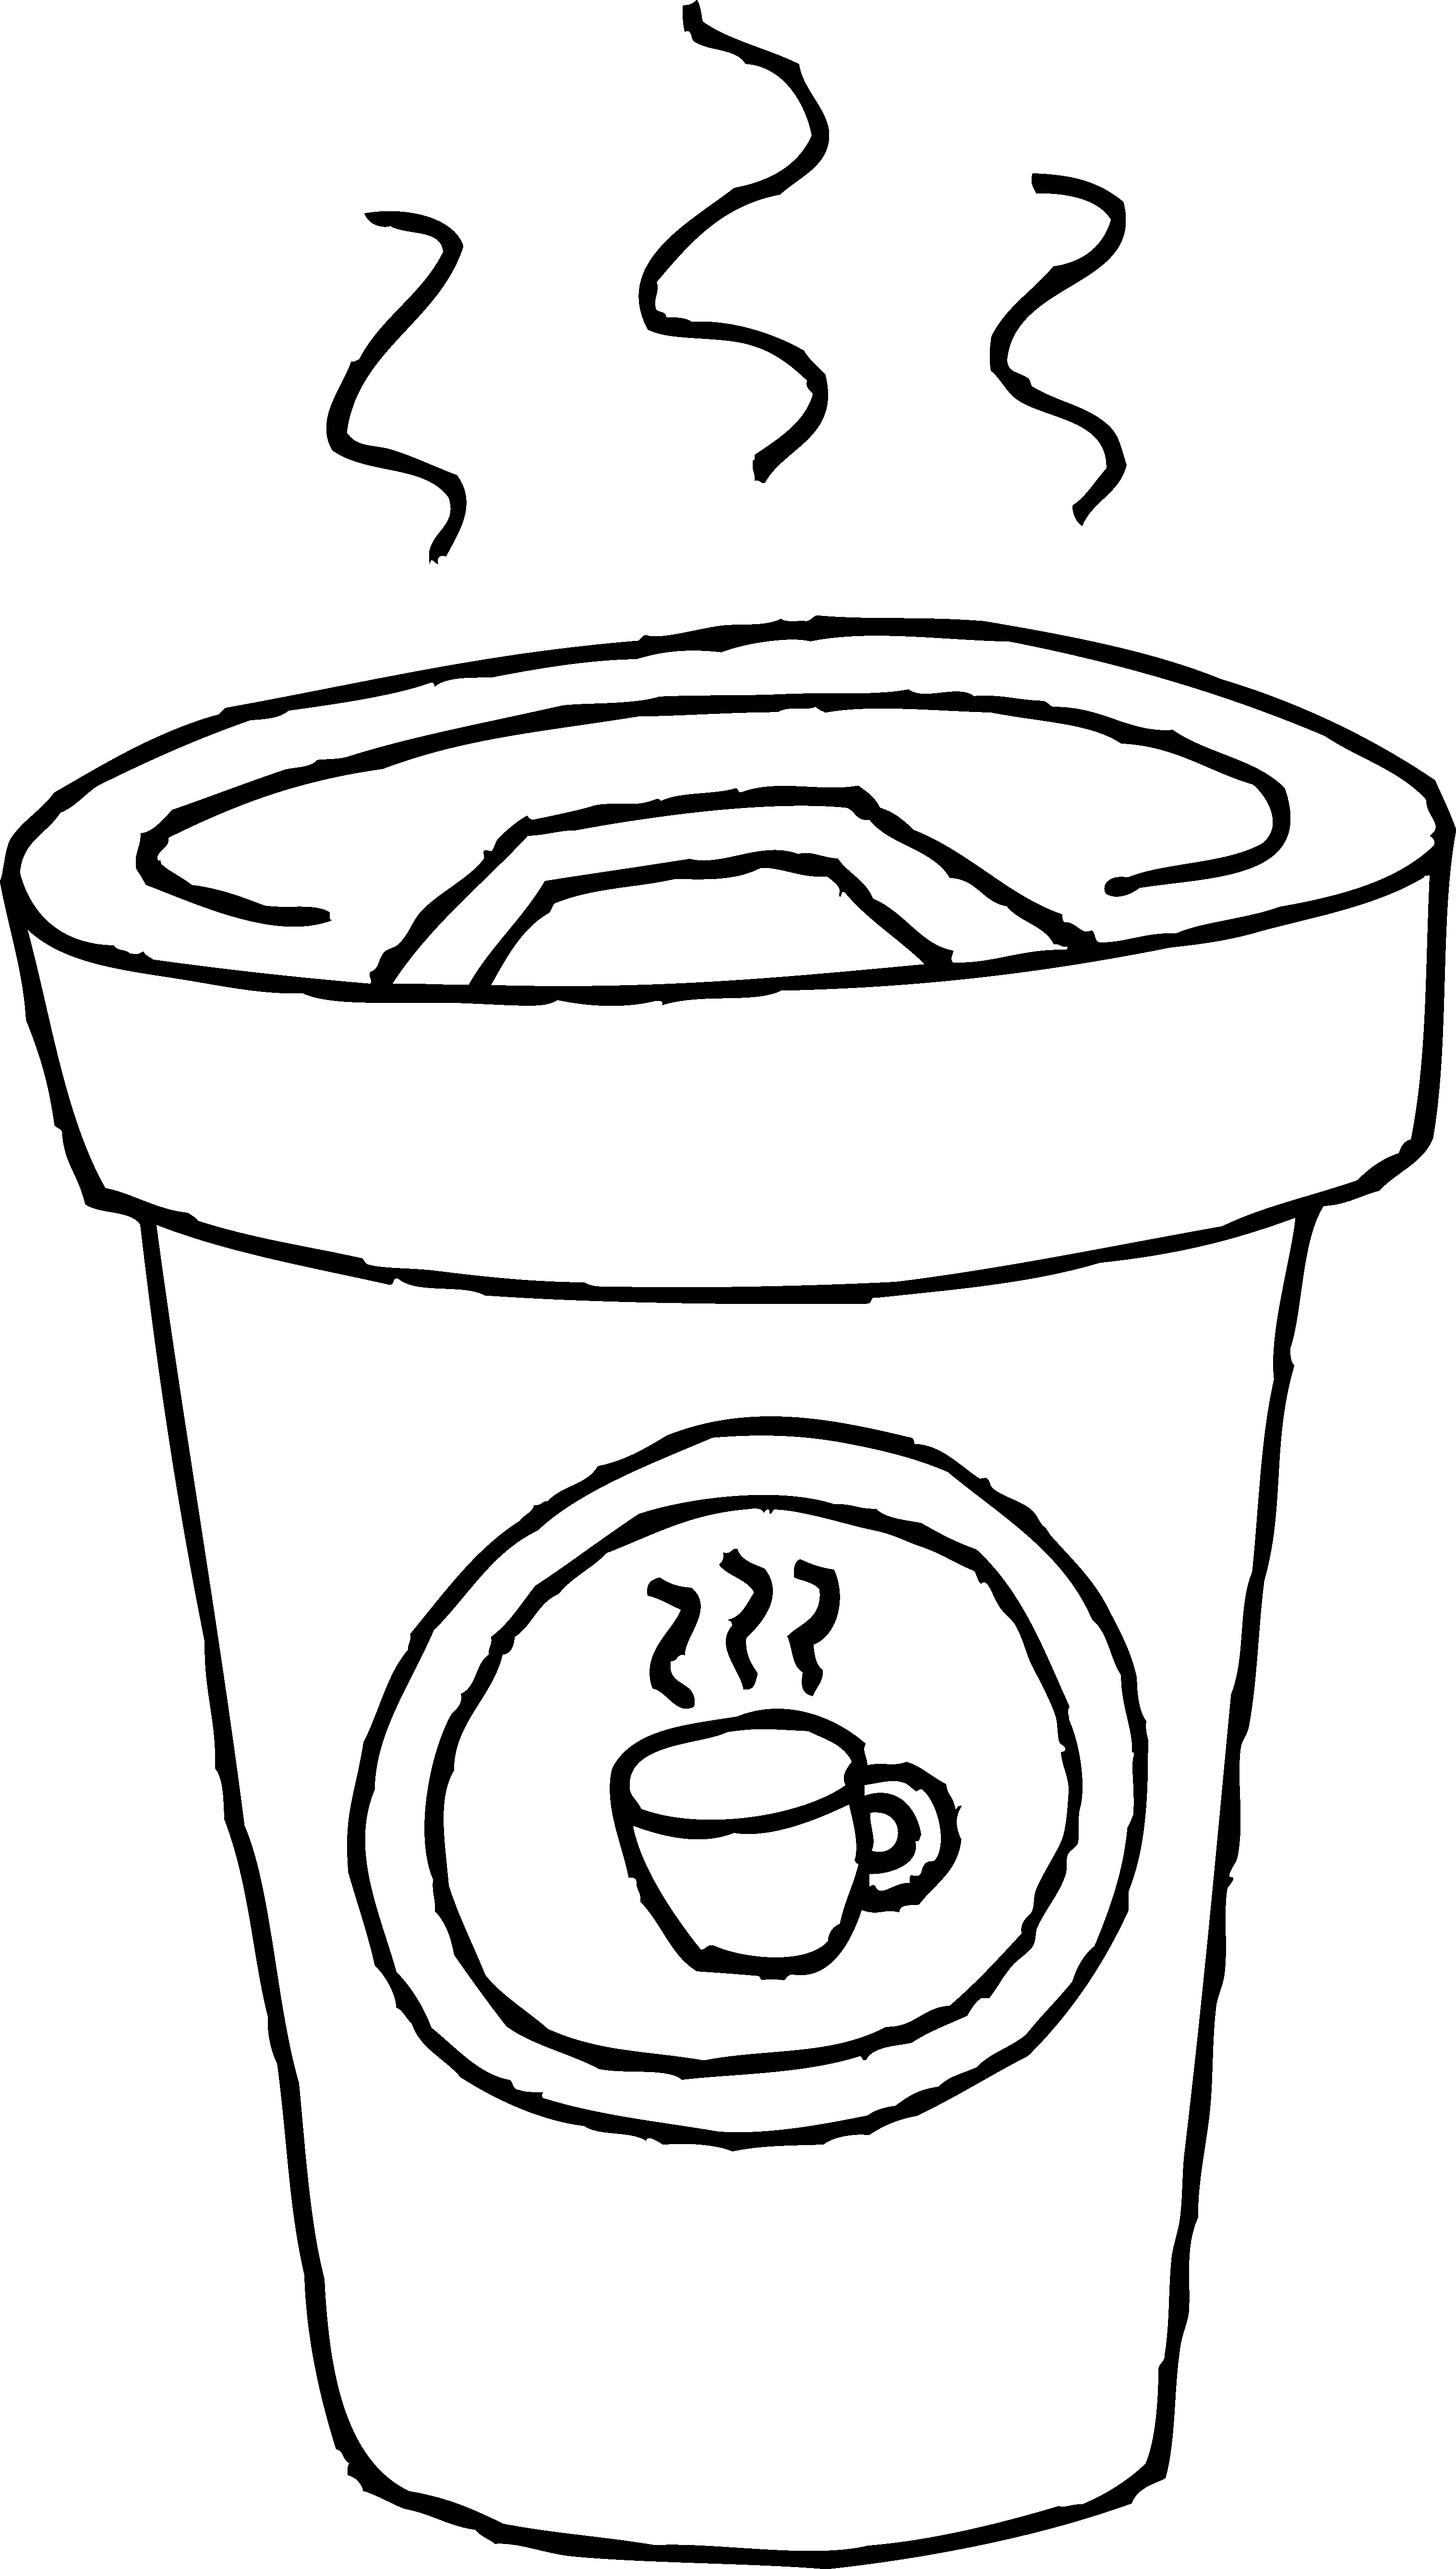 Drawn Mug Coloring Pages - Coffee Cup Clip Art (3033x5351)